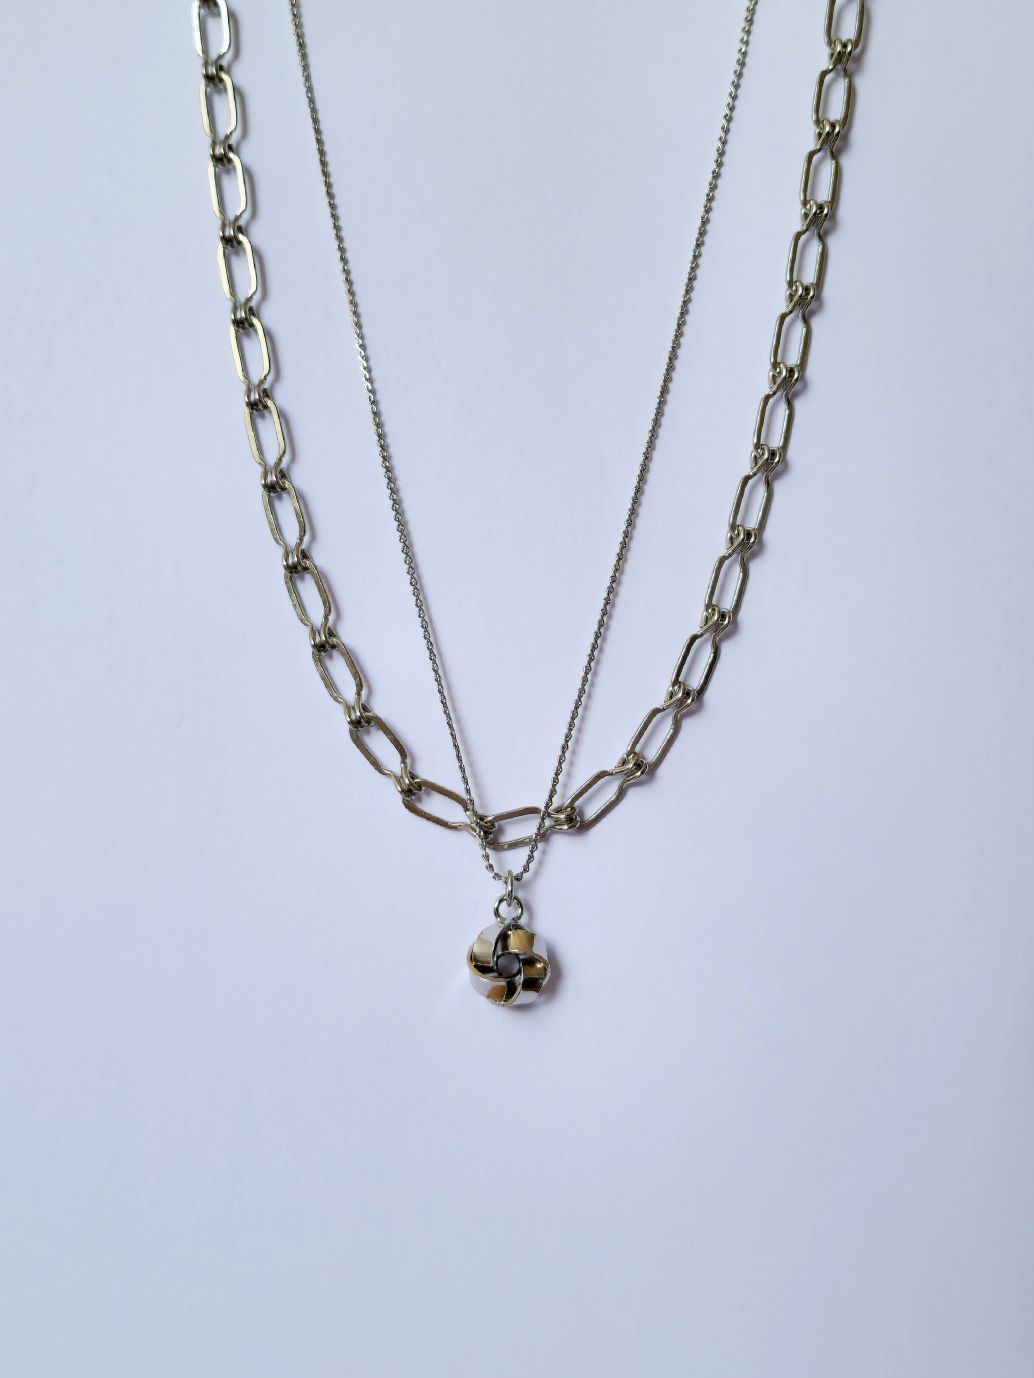 Vintage Silver Plated Chain Pendant Necklace with Twisted Knot Charm